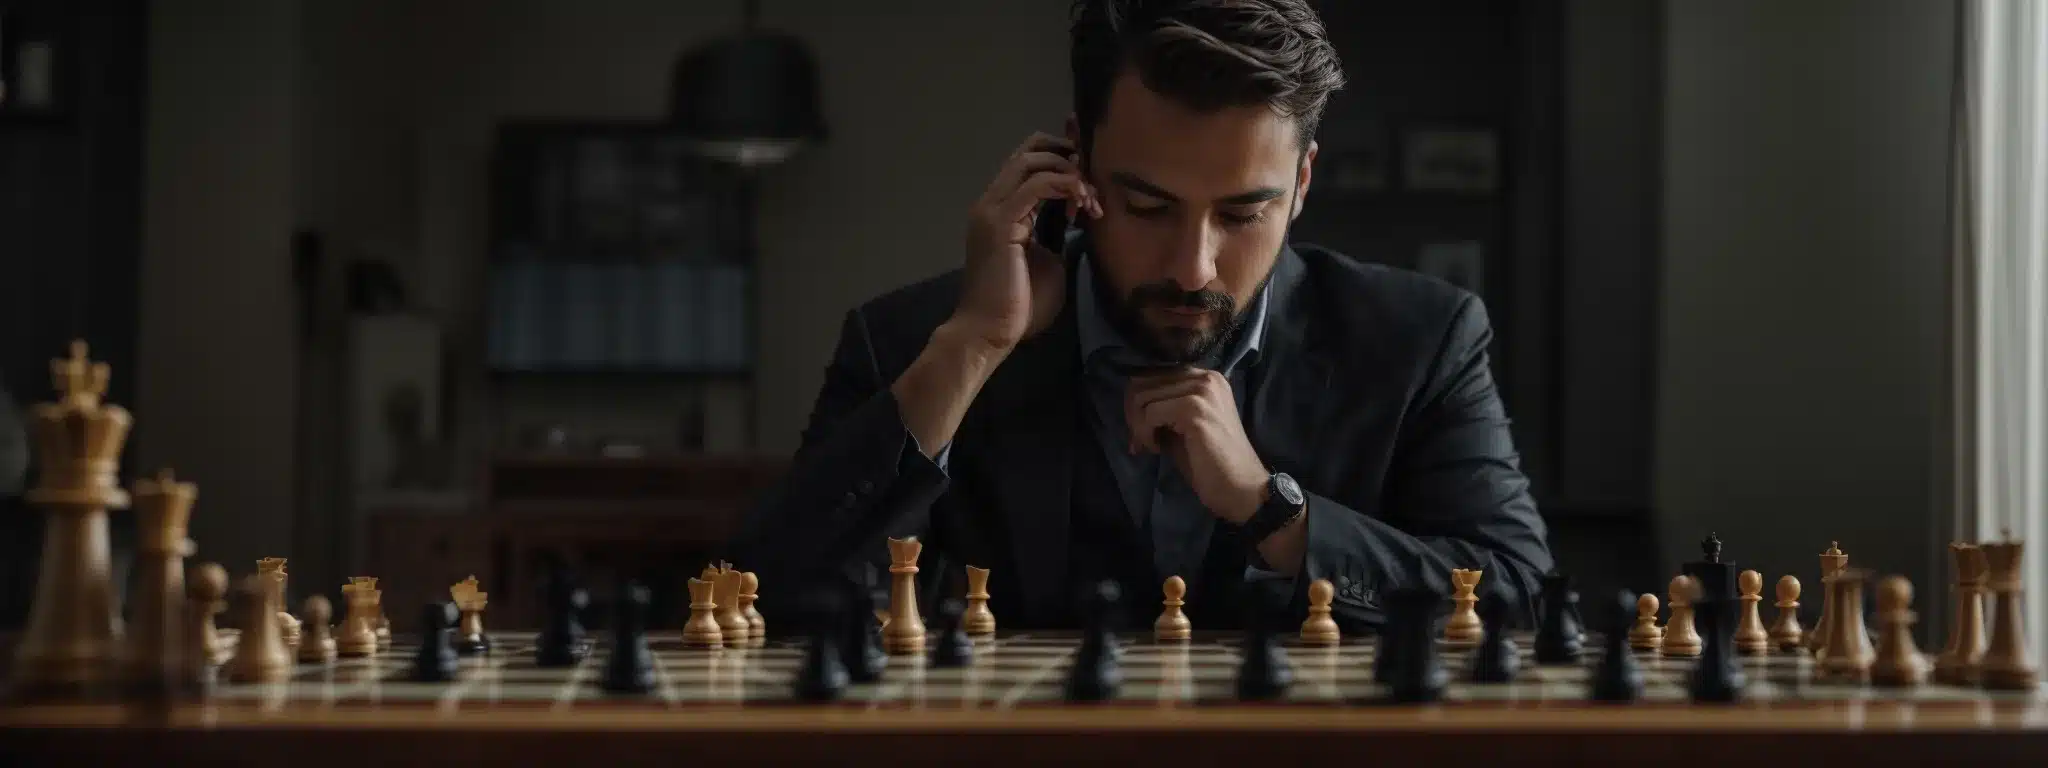 A Strategist Ponders Over A Chessboard, Considering Their Next Move In A Metaphorical Game Of Marketing Mastery.